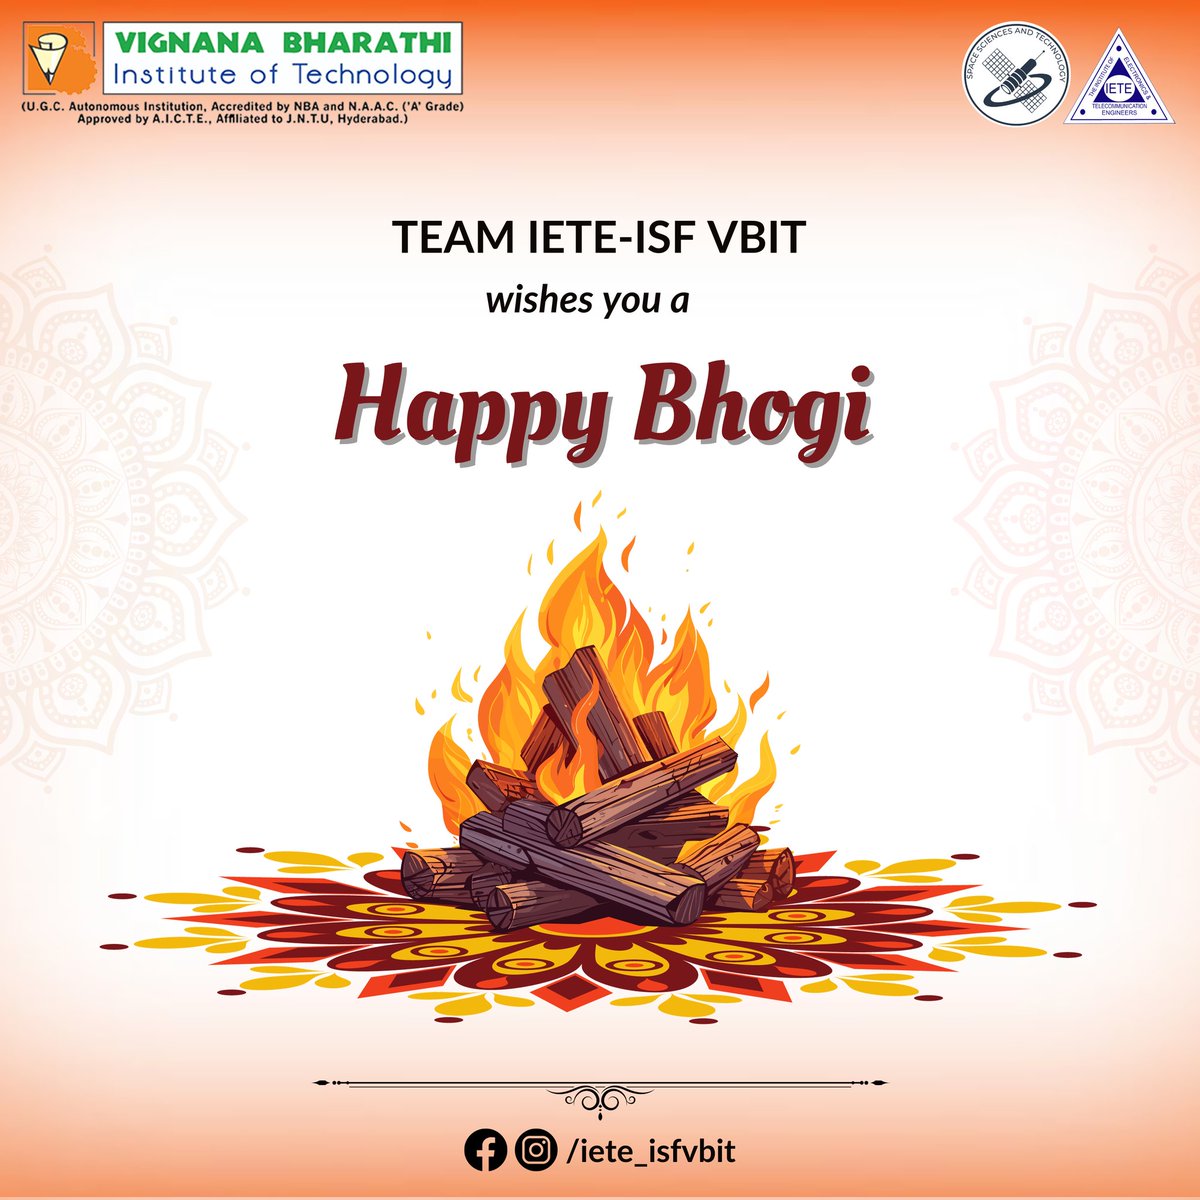 Greetings from IETE-ISF VBIT!!

Embrace the warmth of traditions and share the joy with your loved ones. Let the flames of Bhogi bring prosperity and happiness into your life.

Team IETE-ISF VBIT wishes you a 'Happy Bhogi'.

Regards,
IETE-ISF VBIT.
#Bhogi2024 #ieteisfvbit #vbit